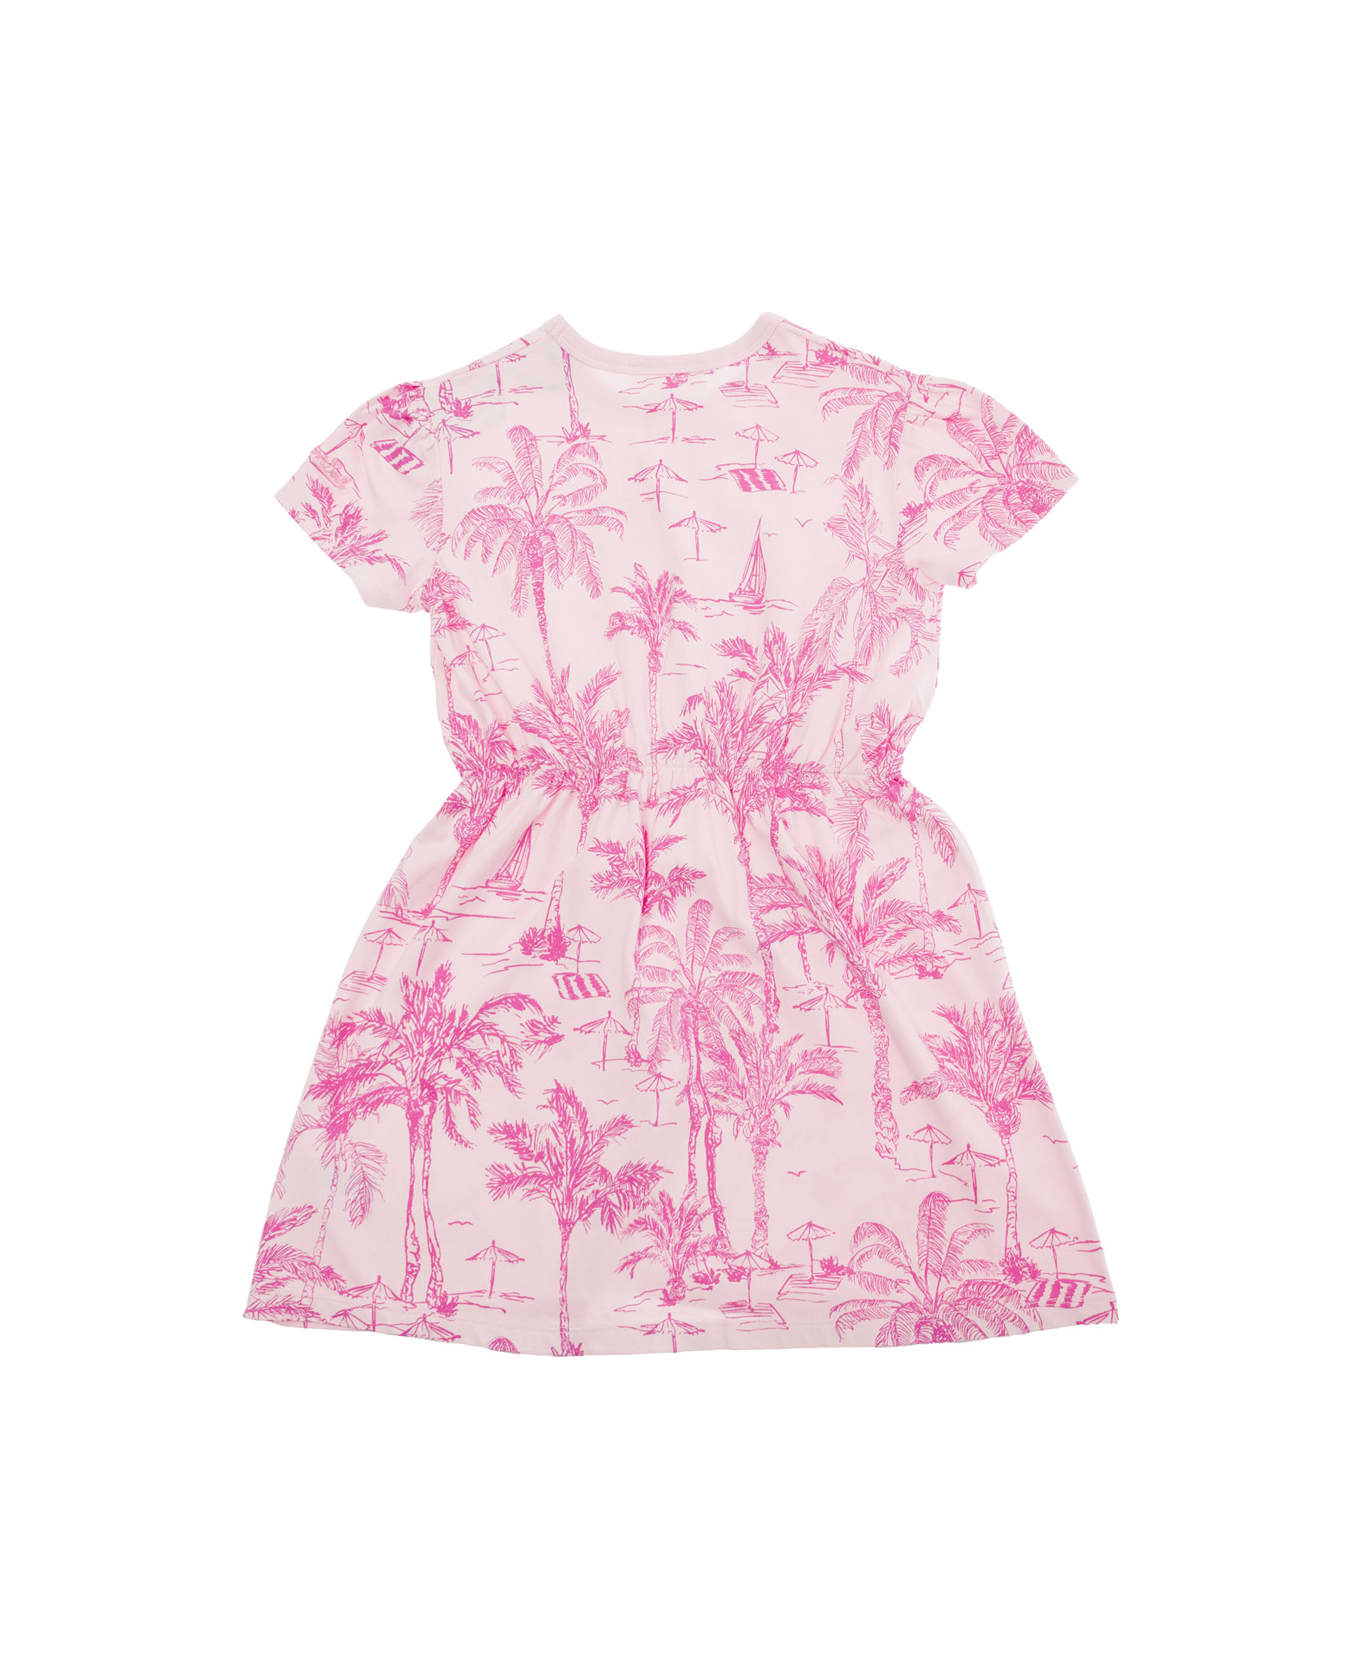 MC2 Saint Barth 'leila' Pink Dress With All-over Palm Print In Cotton Baby - Pink